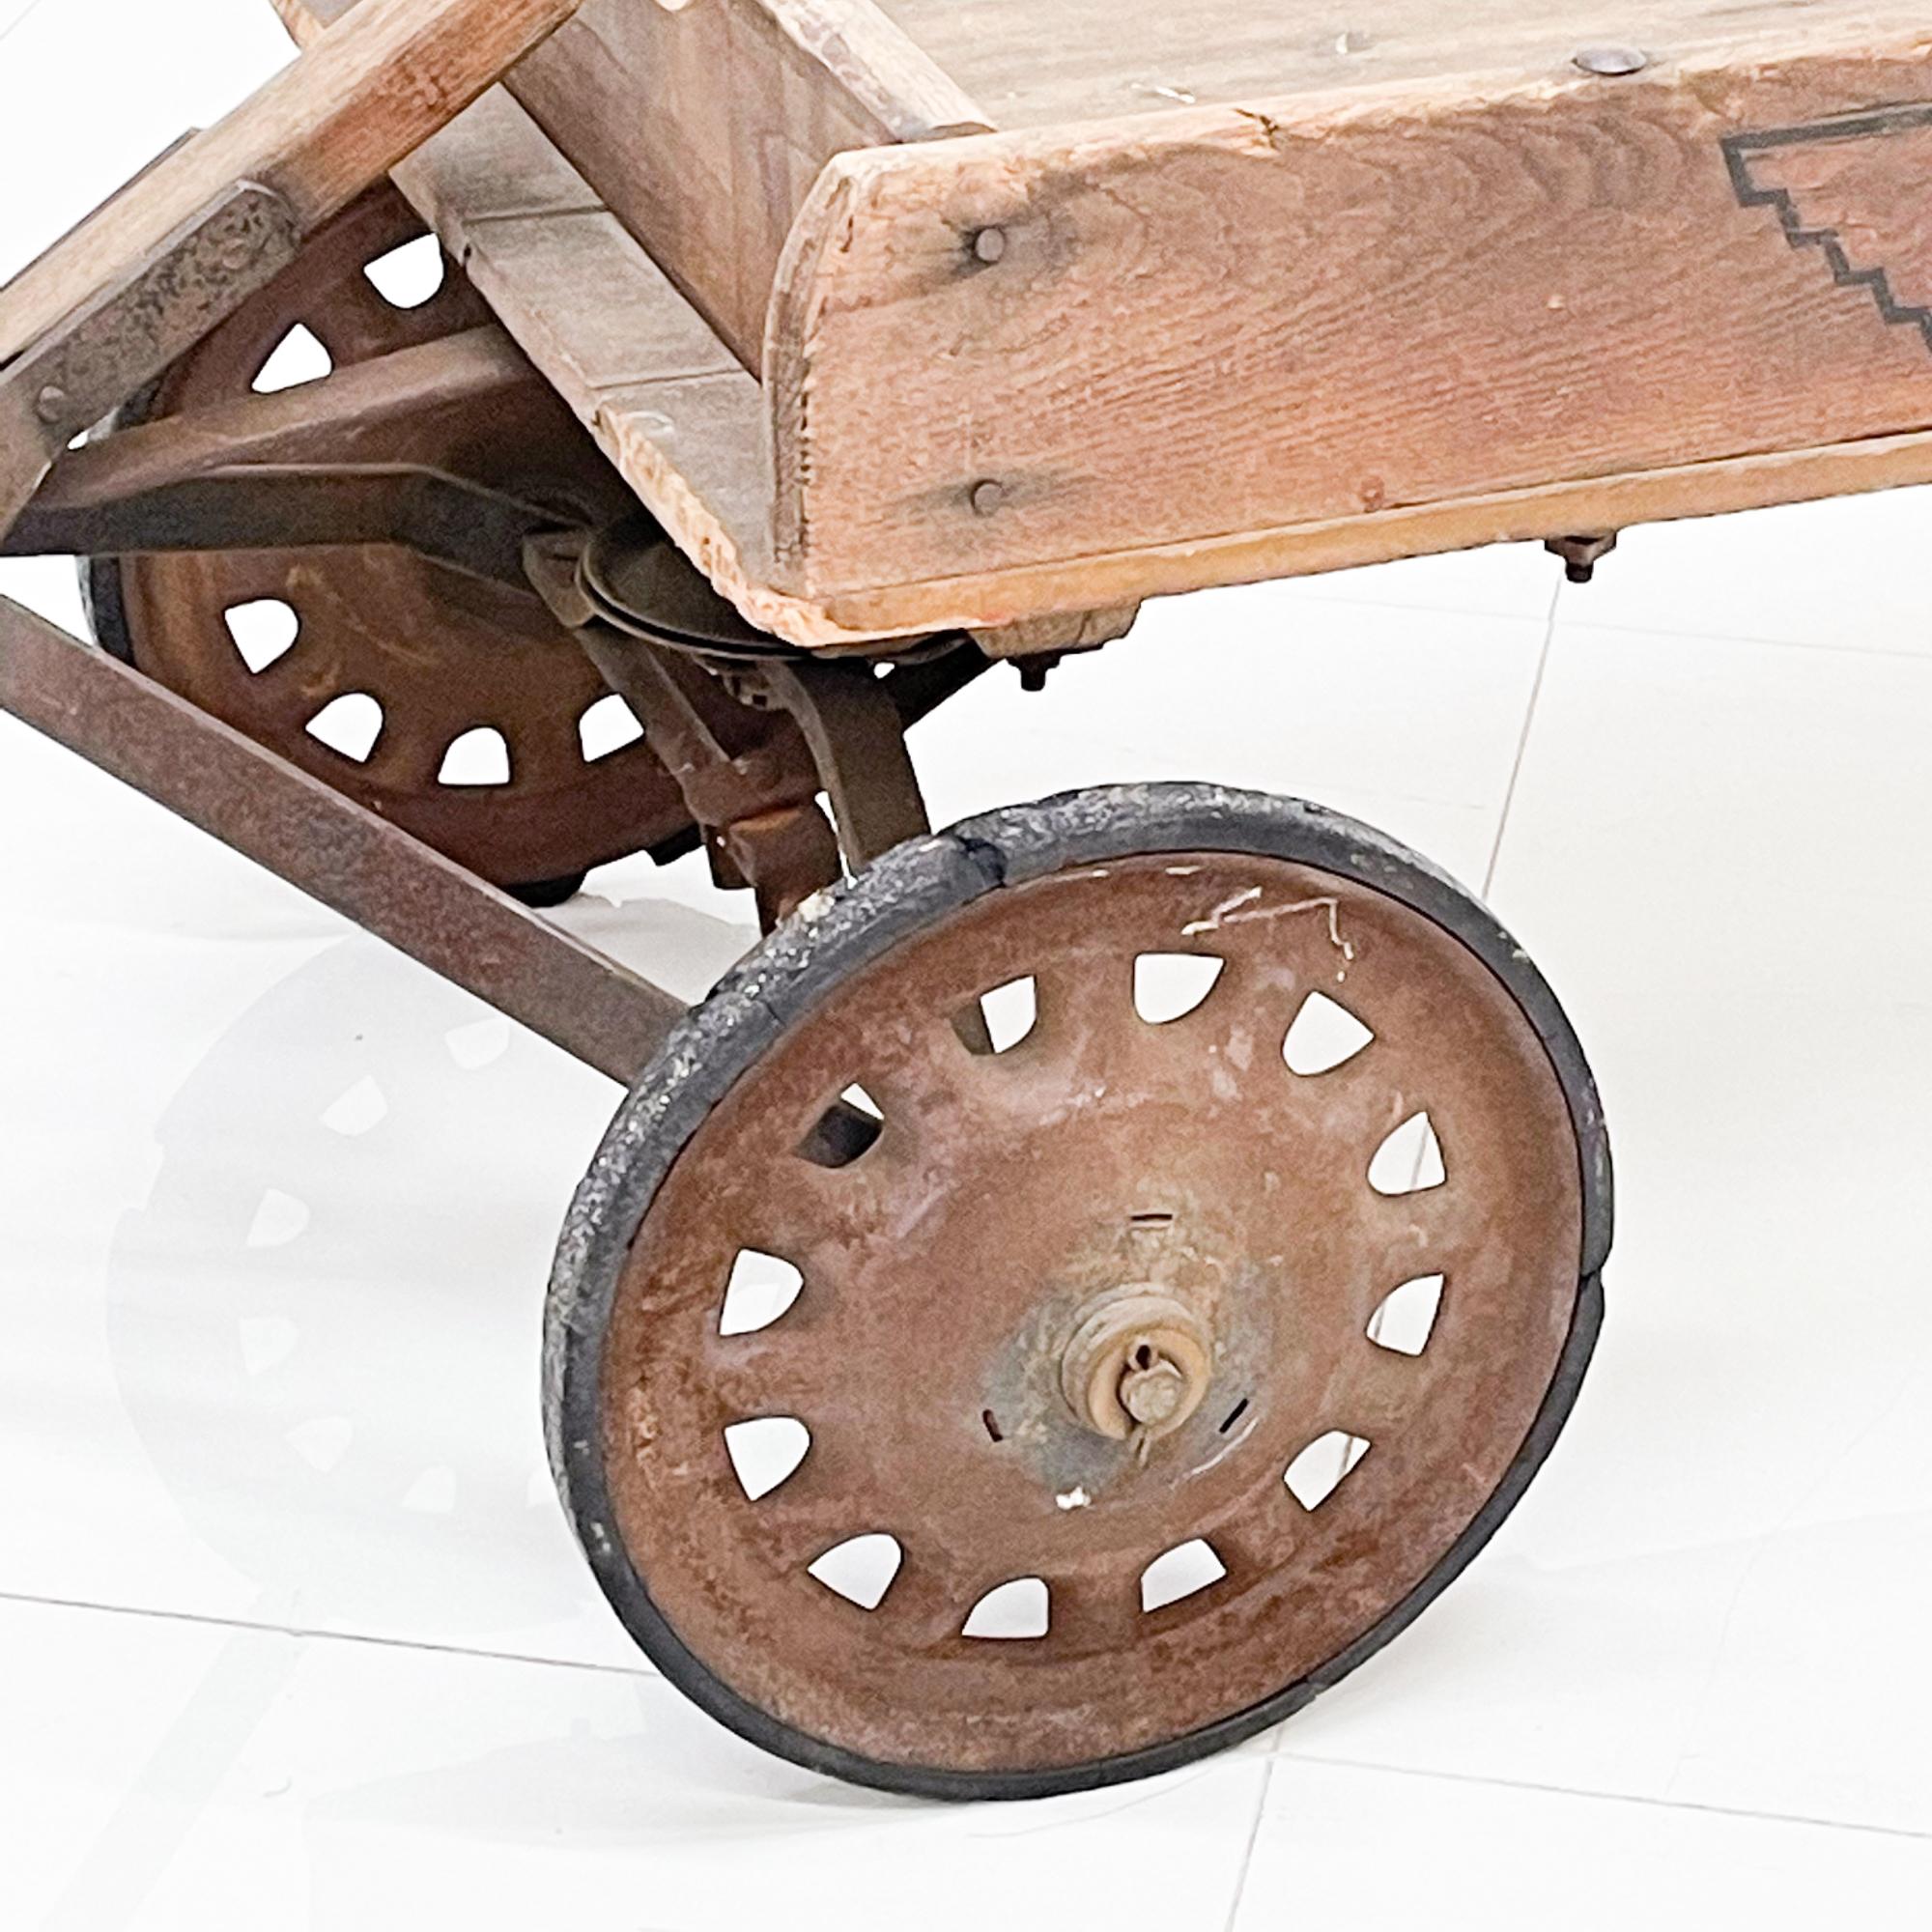 For your consideration, a vintage wooden wagon-cart by Red Racer. Made in the USA circa the 1930s.

Wood with metal frame and rubber wheels. 
Logo from the manufacturer present on the side of the wagon. 
Great collectible Wagon, ideal